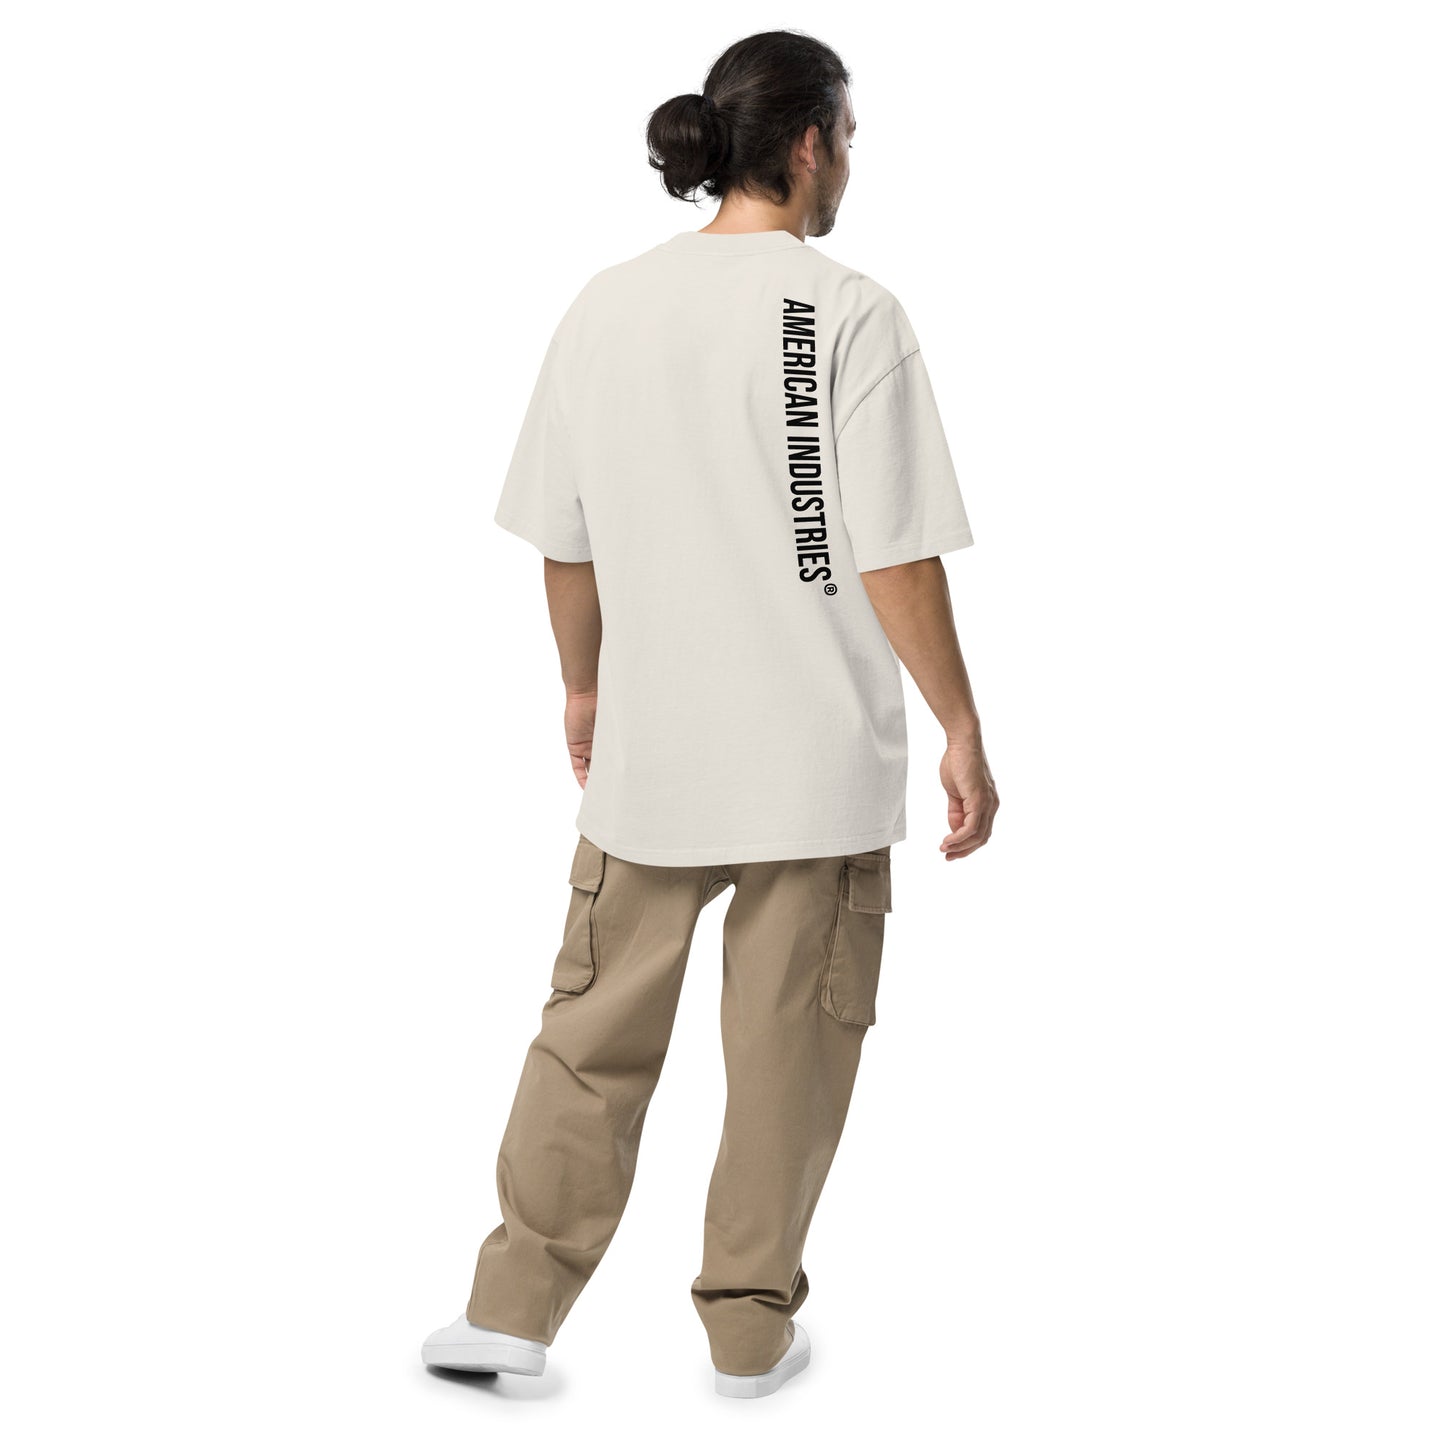 American Industries ® EOD Oversized faded t-shirt